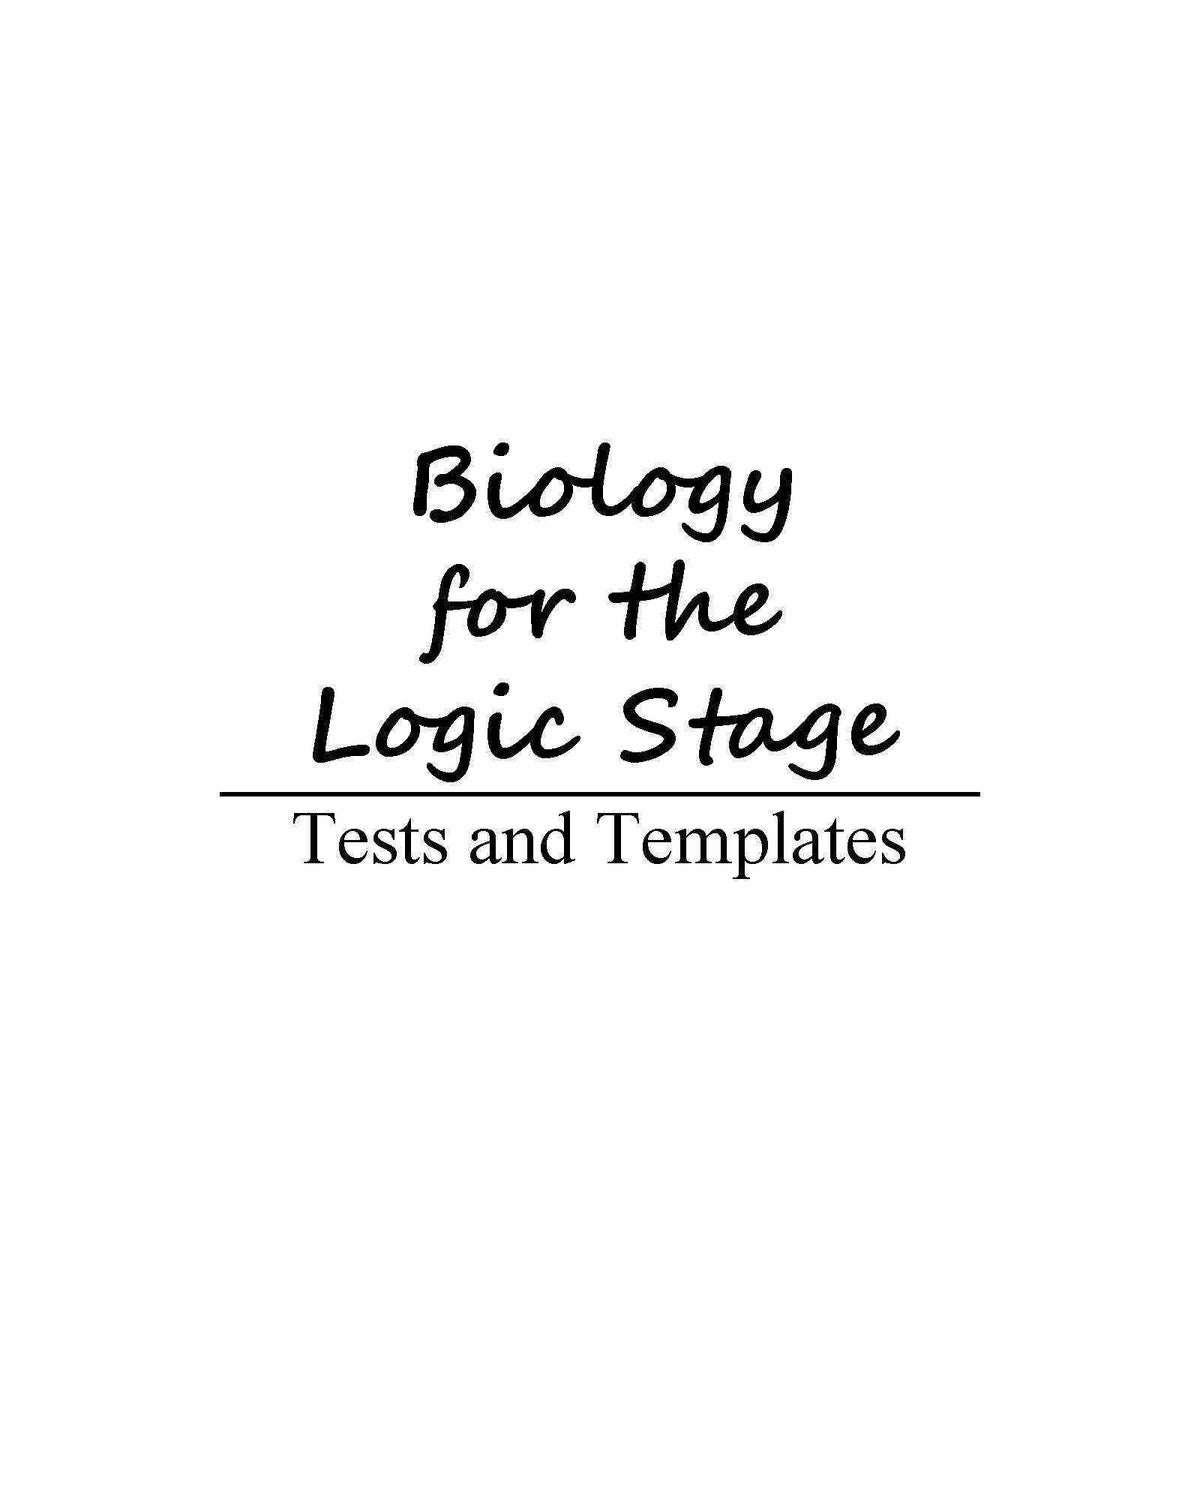 Logic Stage Tests and Templates for Biology